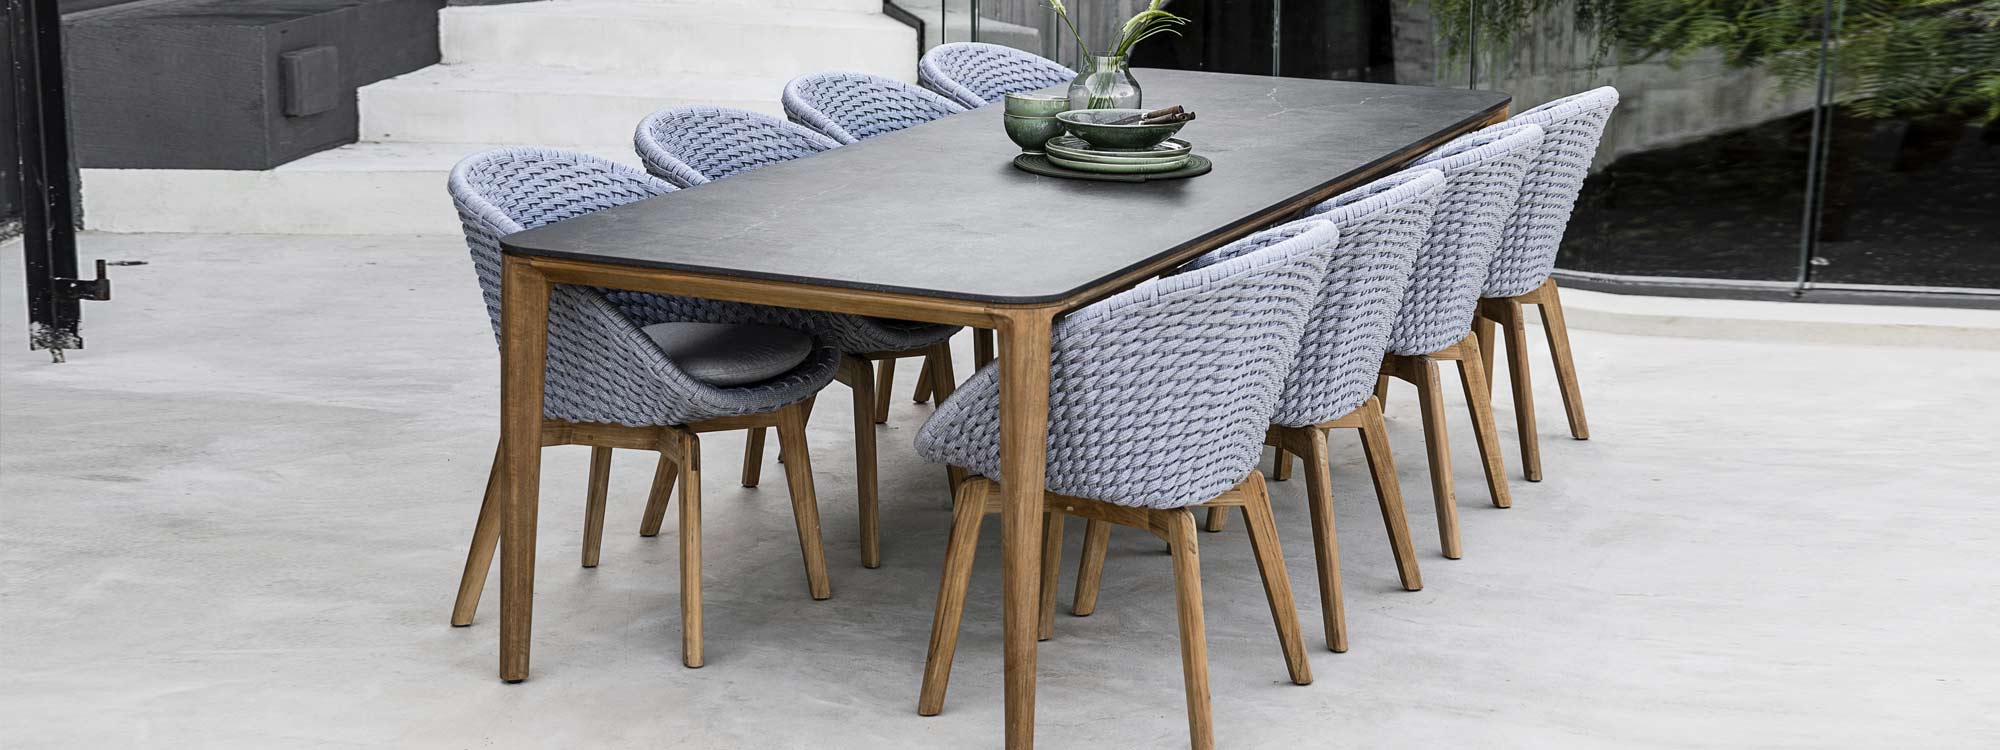 Aspect Table & Light Grey Peacock woven garden dining chair is a modern garden furniture chair in all-weather furniture materials by Cane-line luxury outdoor furniture